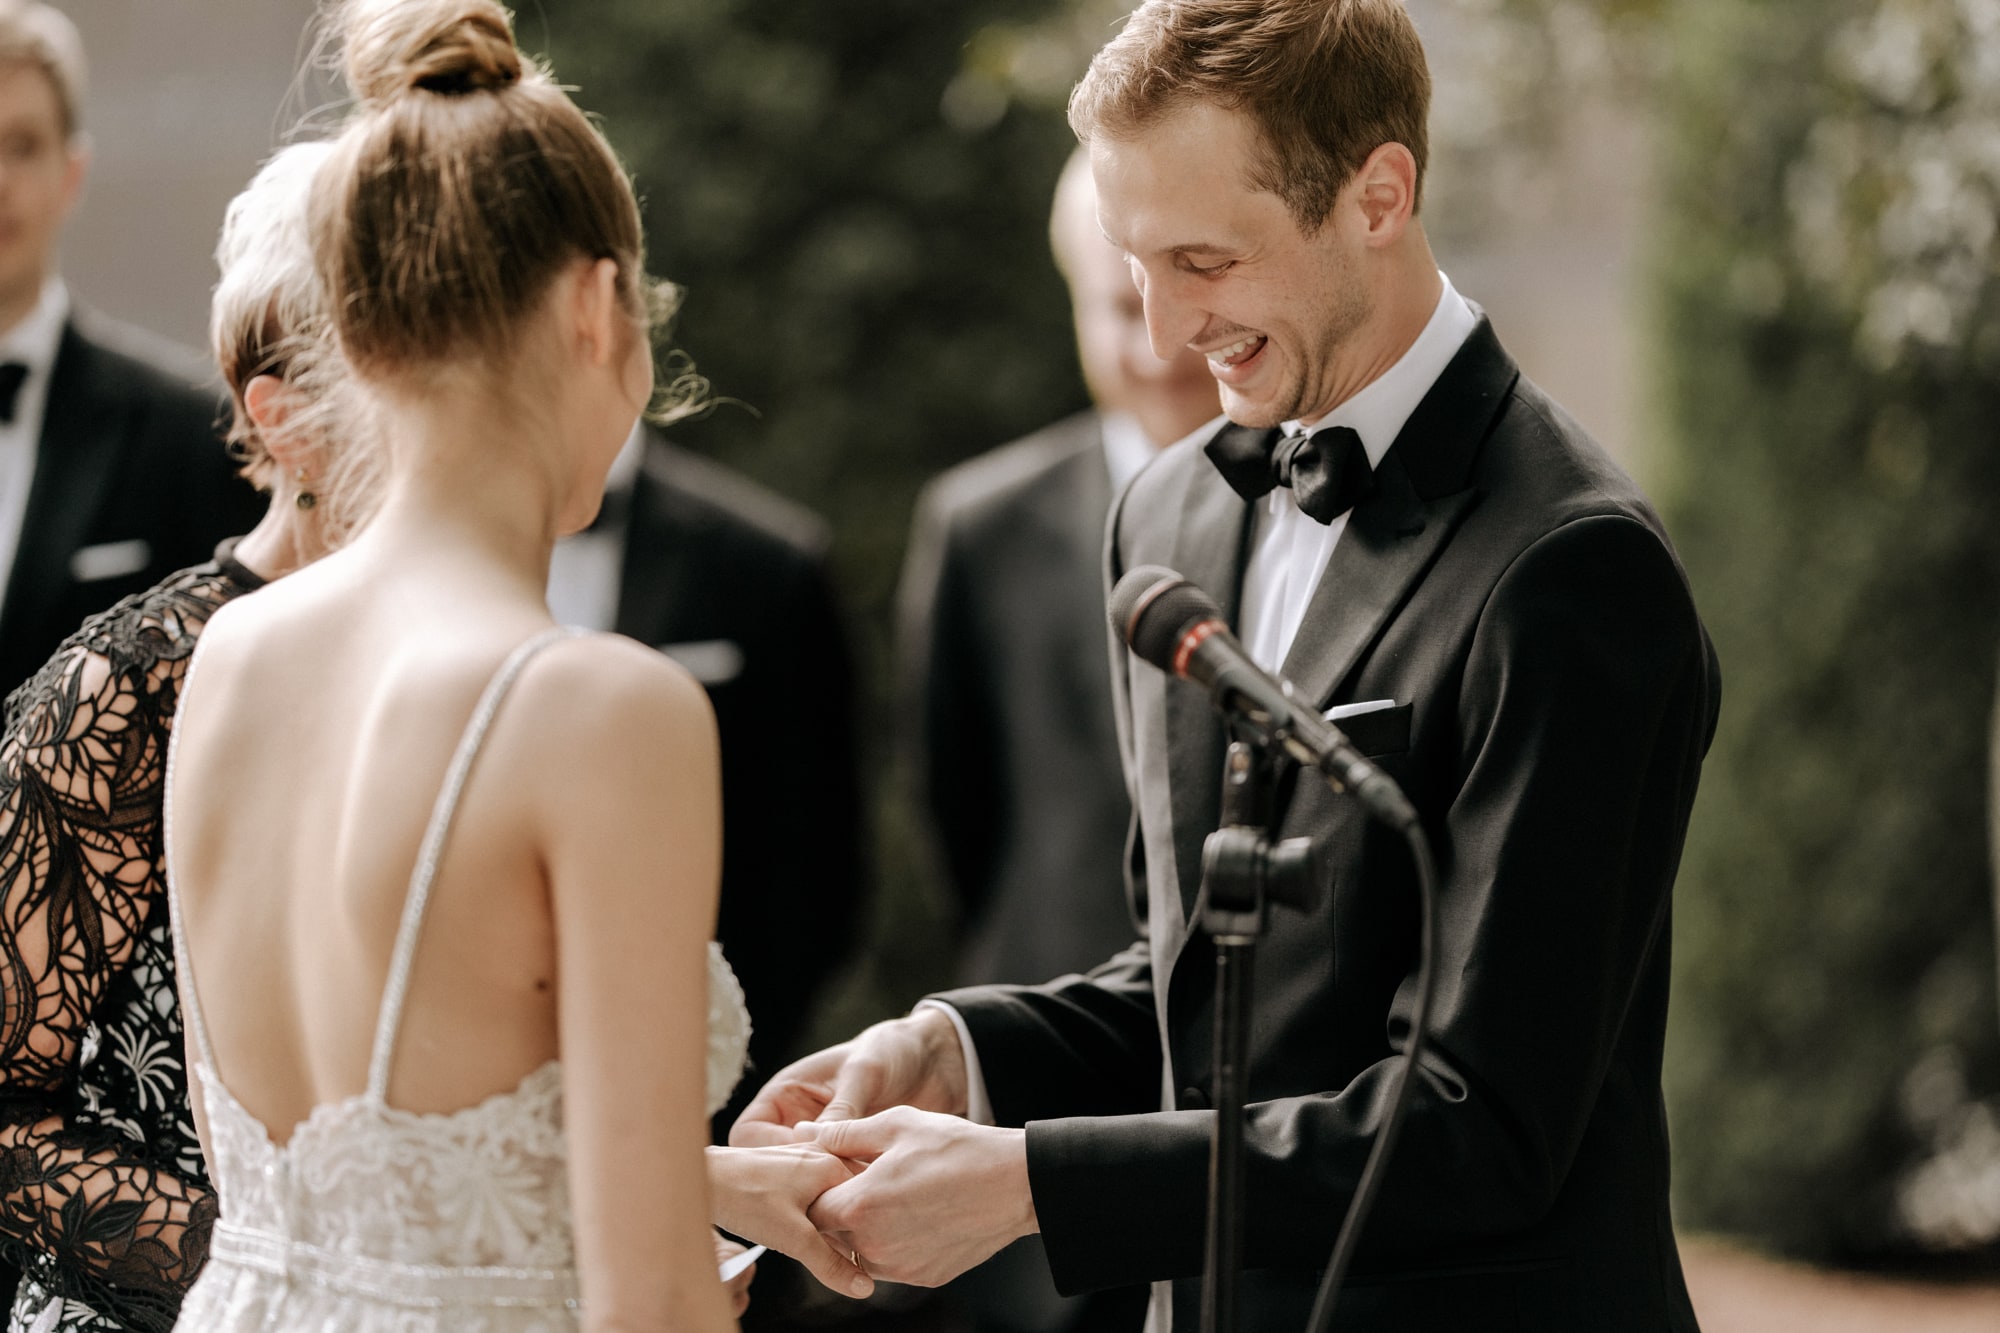 A groom smiles enthusiastically while placing a ring on the finger of his new bride during a beautiful wedding at the Minneapolis Institute of Art.